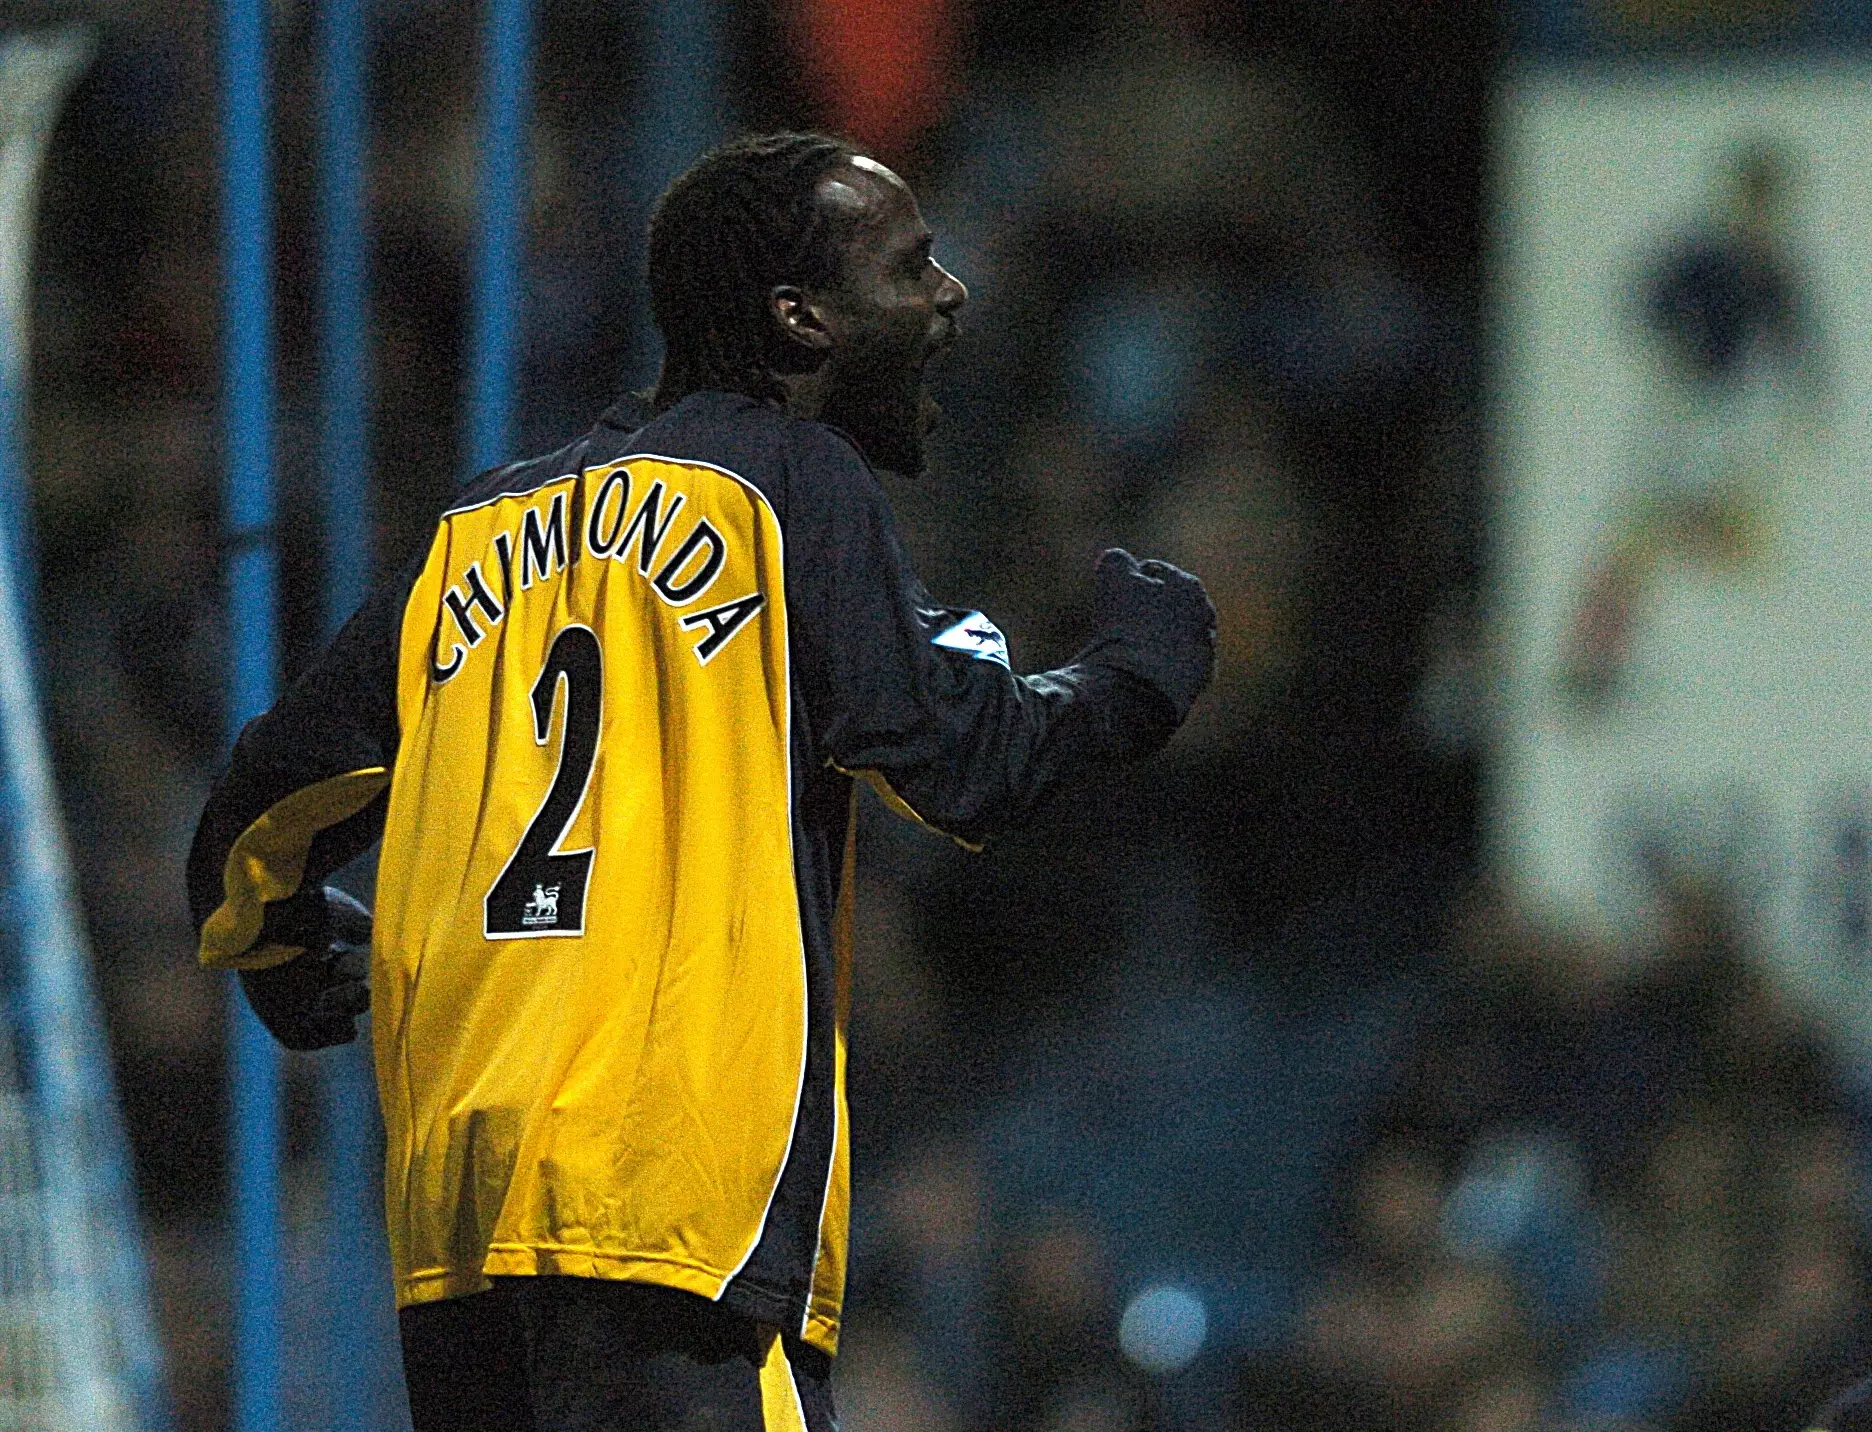 Chimbonda had an excellent season for Wigan. Image: PA Images